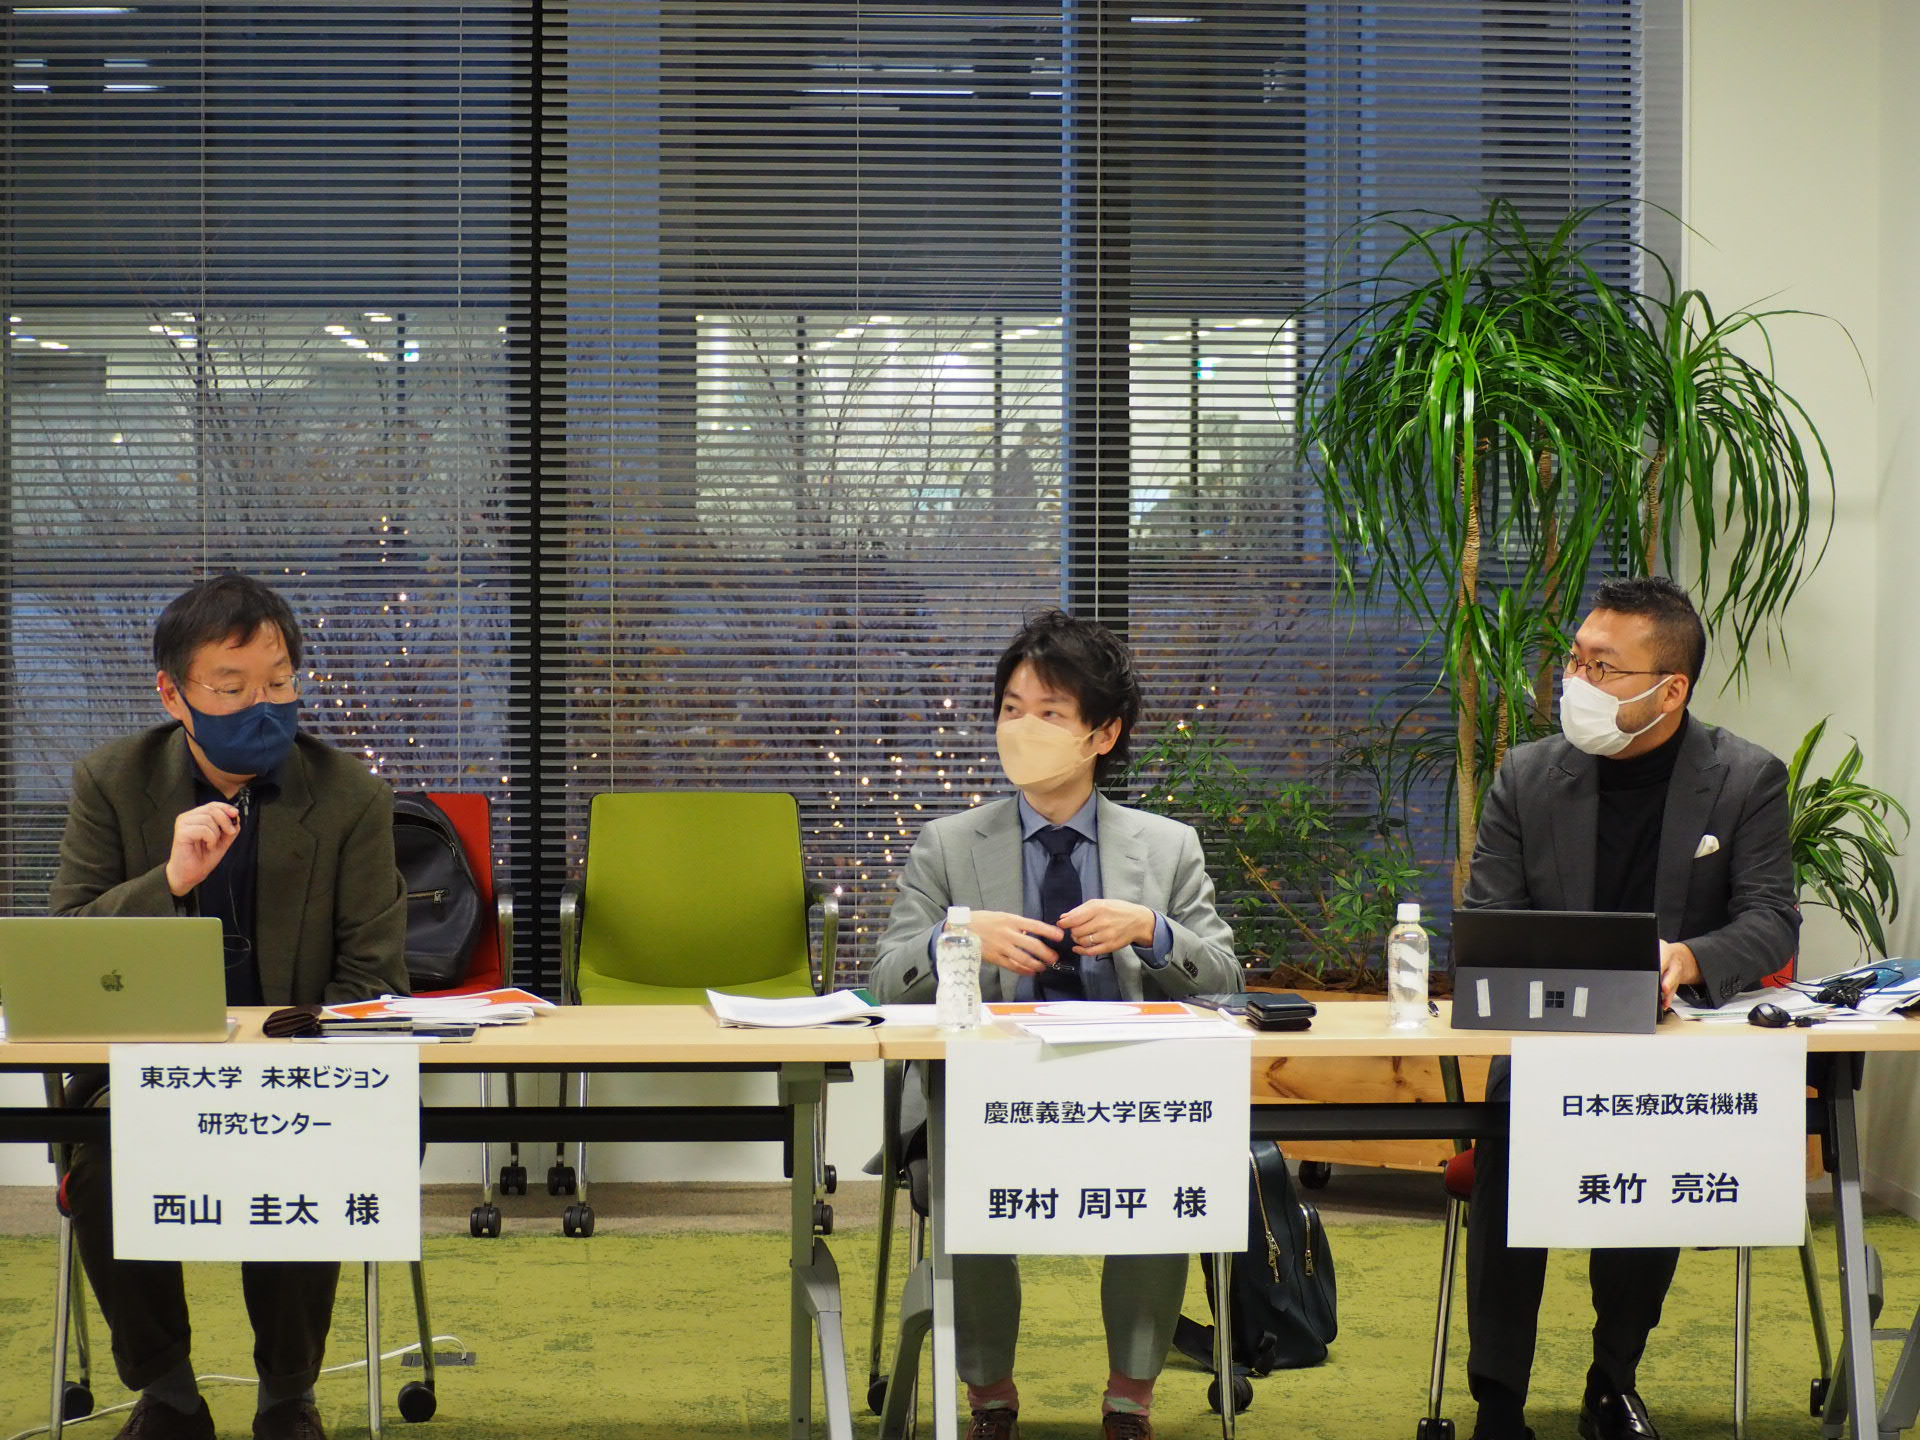 [Event Report] Future of the Healthcare System Project – The Second Media Seminar and Workshop for Promoting Healthcare Reform: Reexamining Issues and Sharing Opinions on Health Policy in Japan (December 14, 2022)